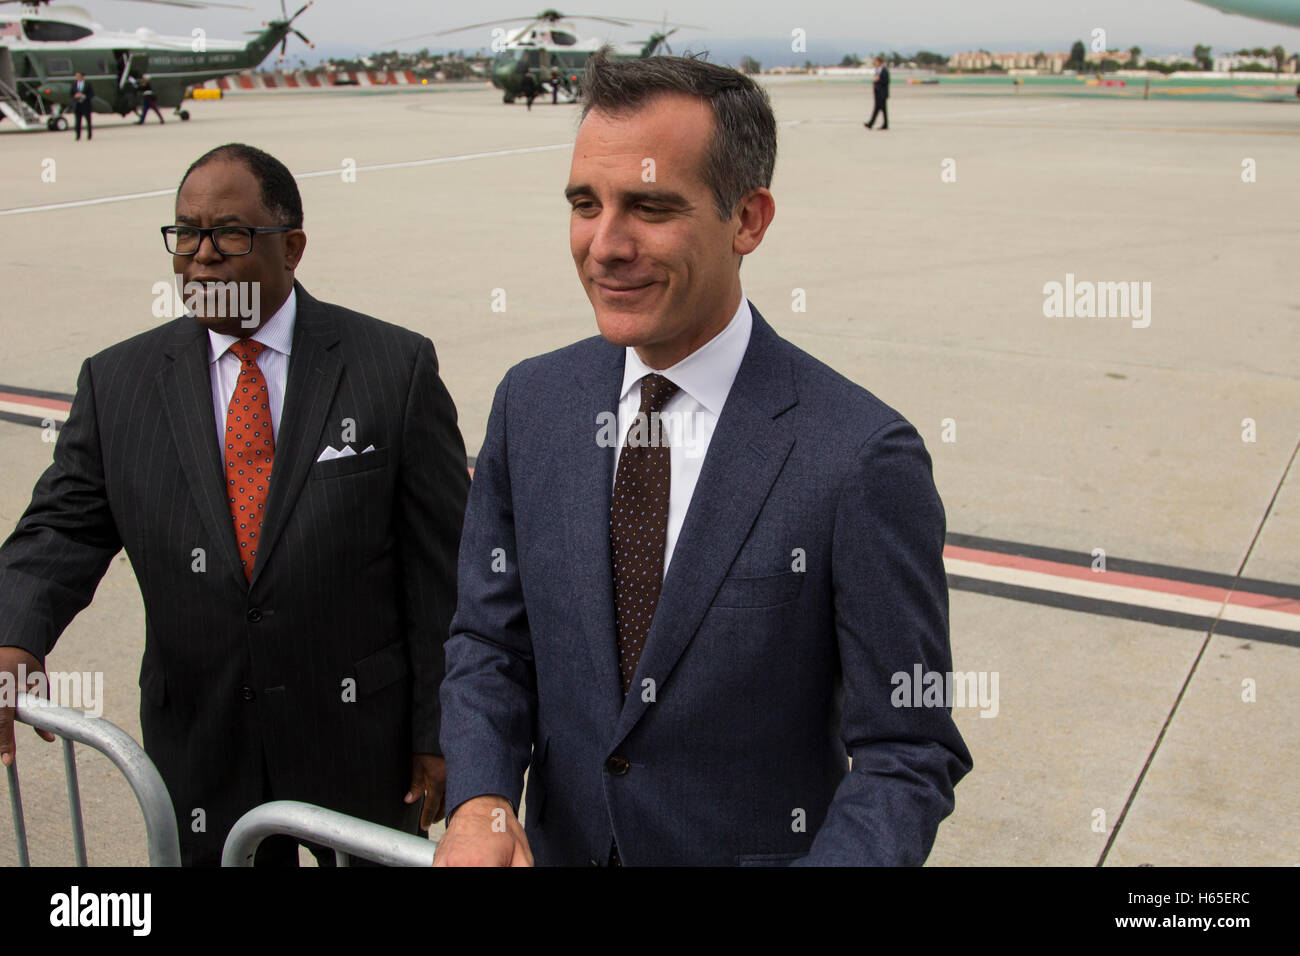 Los Angeles, USA. 24th Oct, 2016. (L-R) Supervisor Mark Ridley-Thomas and Los Angeles Mayor Eric Garcetti at LAX International Airport on October 24, 2016 in Los Angeles, California. Credit:  The Photo Access/Alamy Live News Stock Photo